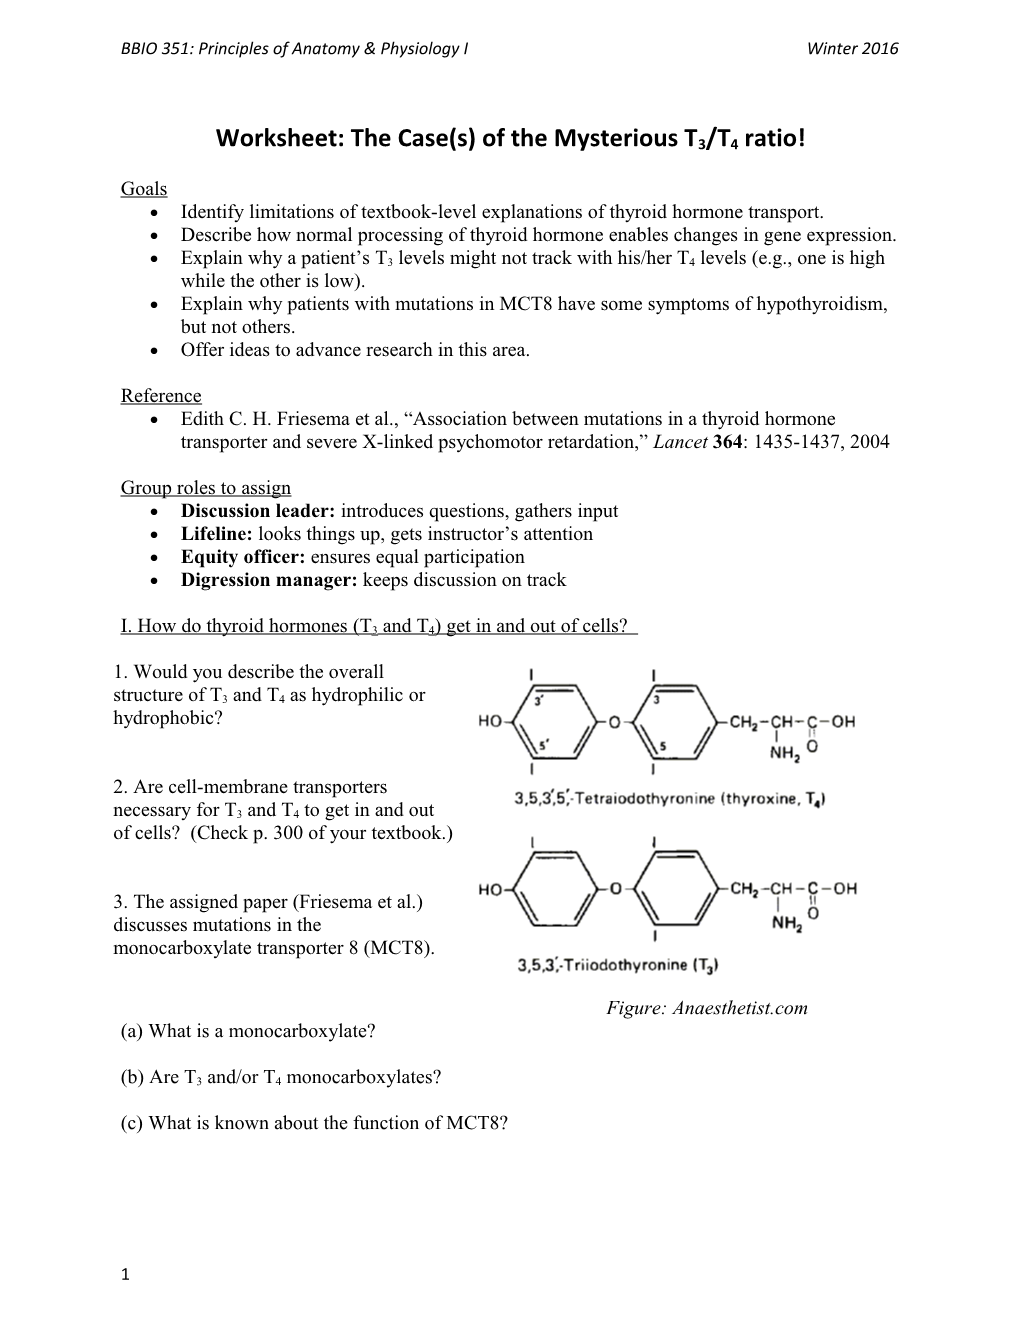 Worksheet: the Case(S) of the Mysterious T3/T4 Ratio!